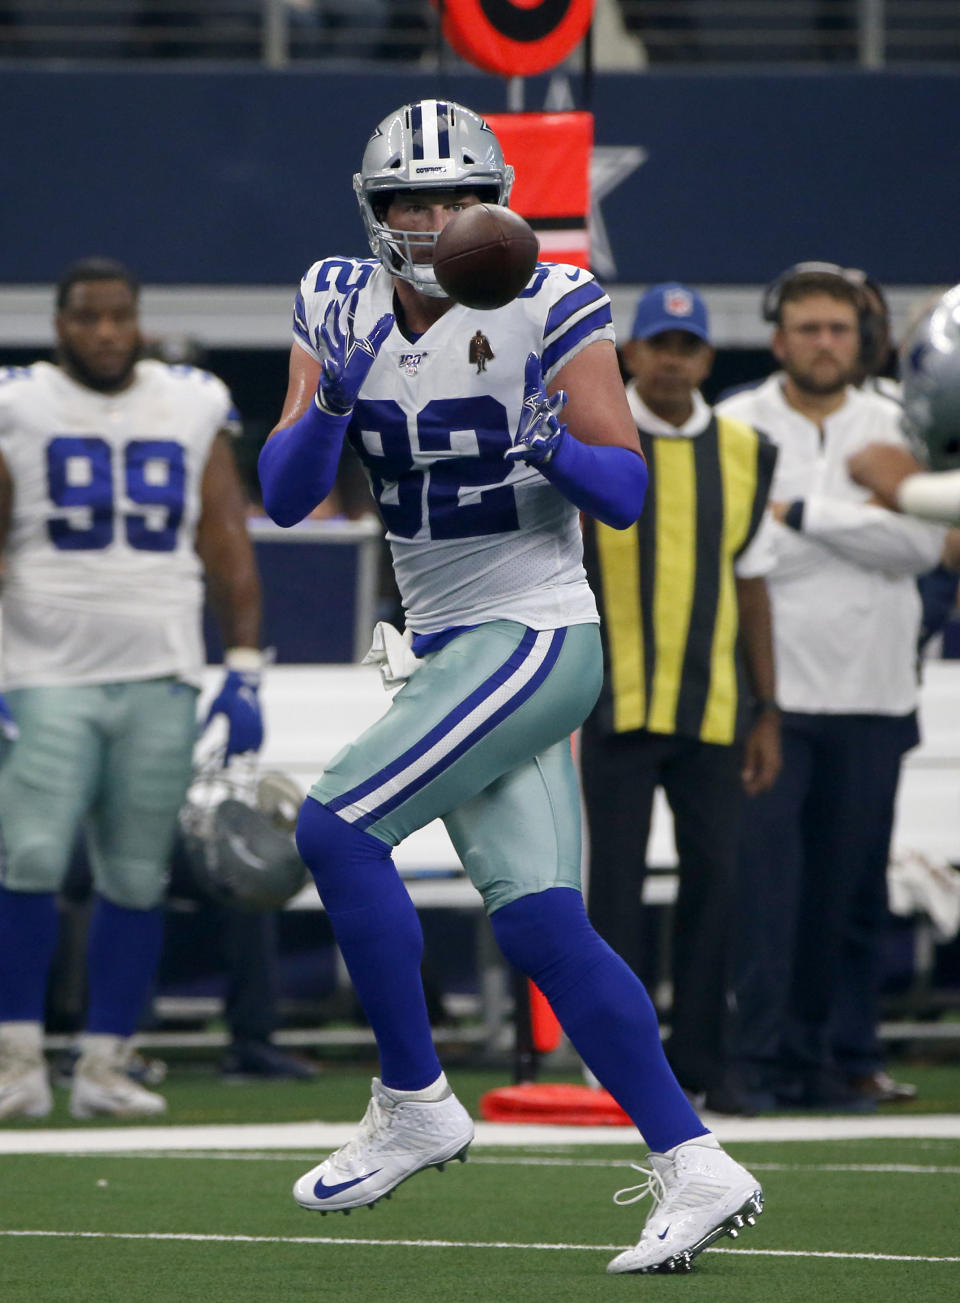 Dallas Cowboys tight end Jason Witten (82) reaches up to make a catch in the first half of a NFL football game against the New York Giants in Arlington, Texas, Sunday, Sept. 8, 2019. (AP Photo/Michael Ainsworth)